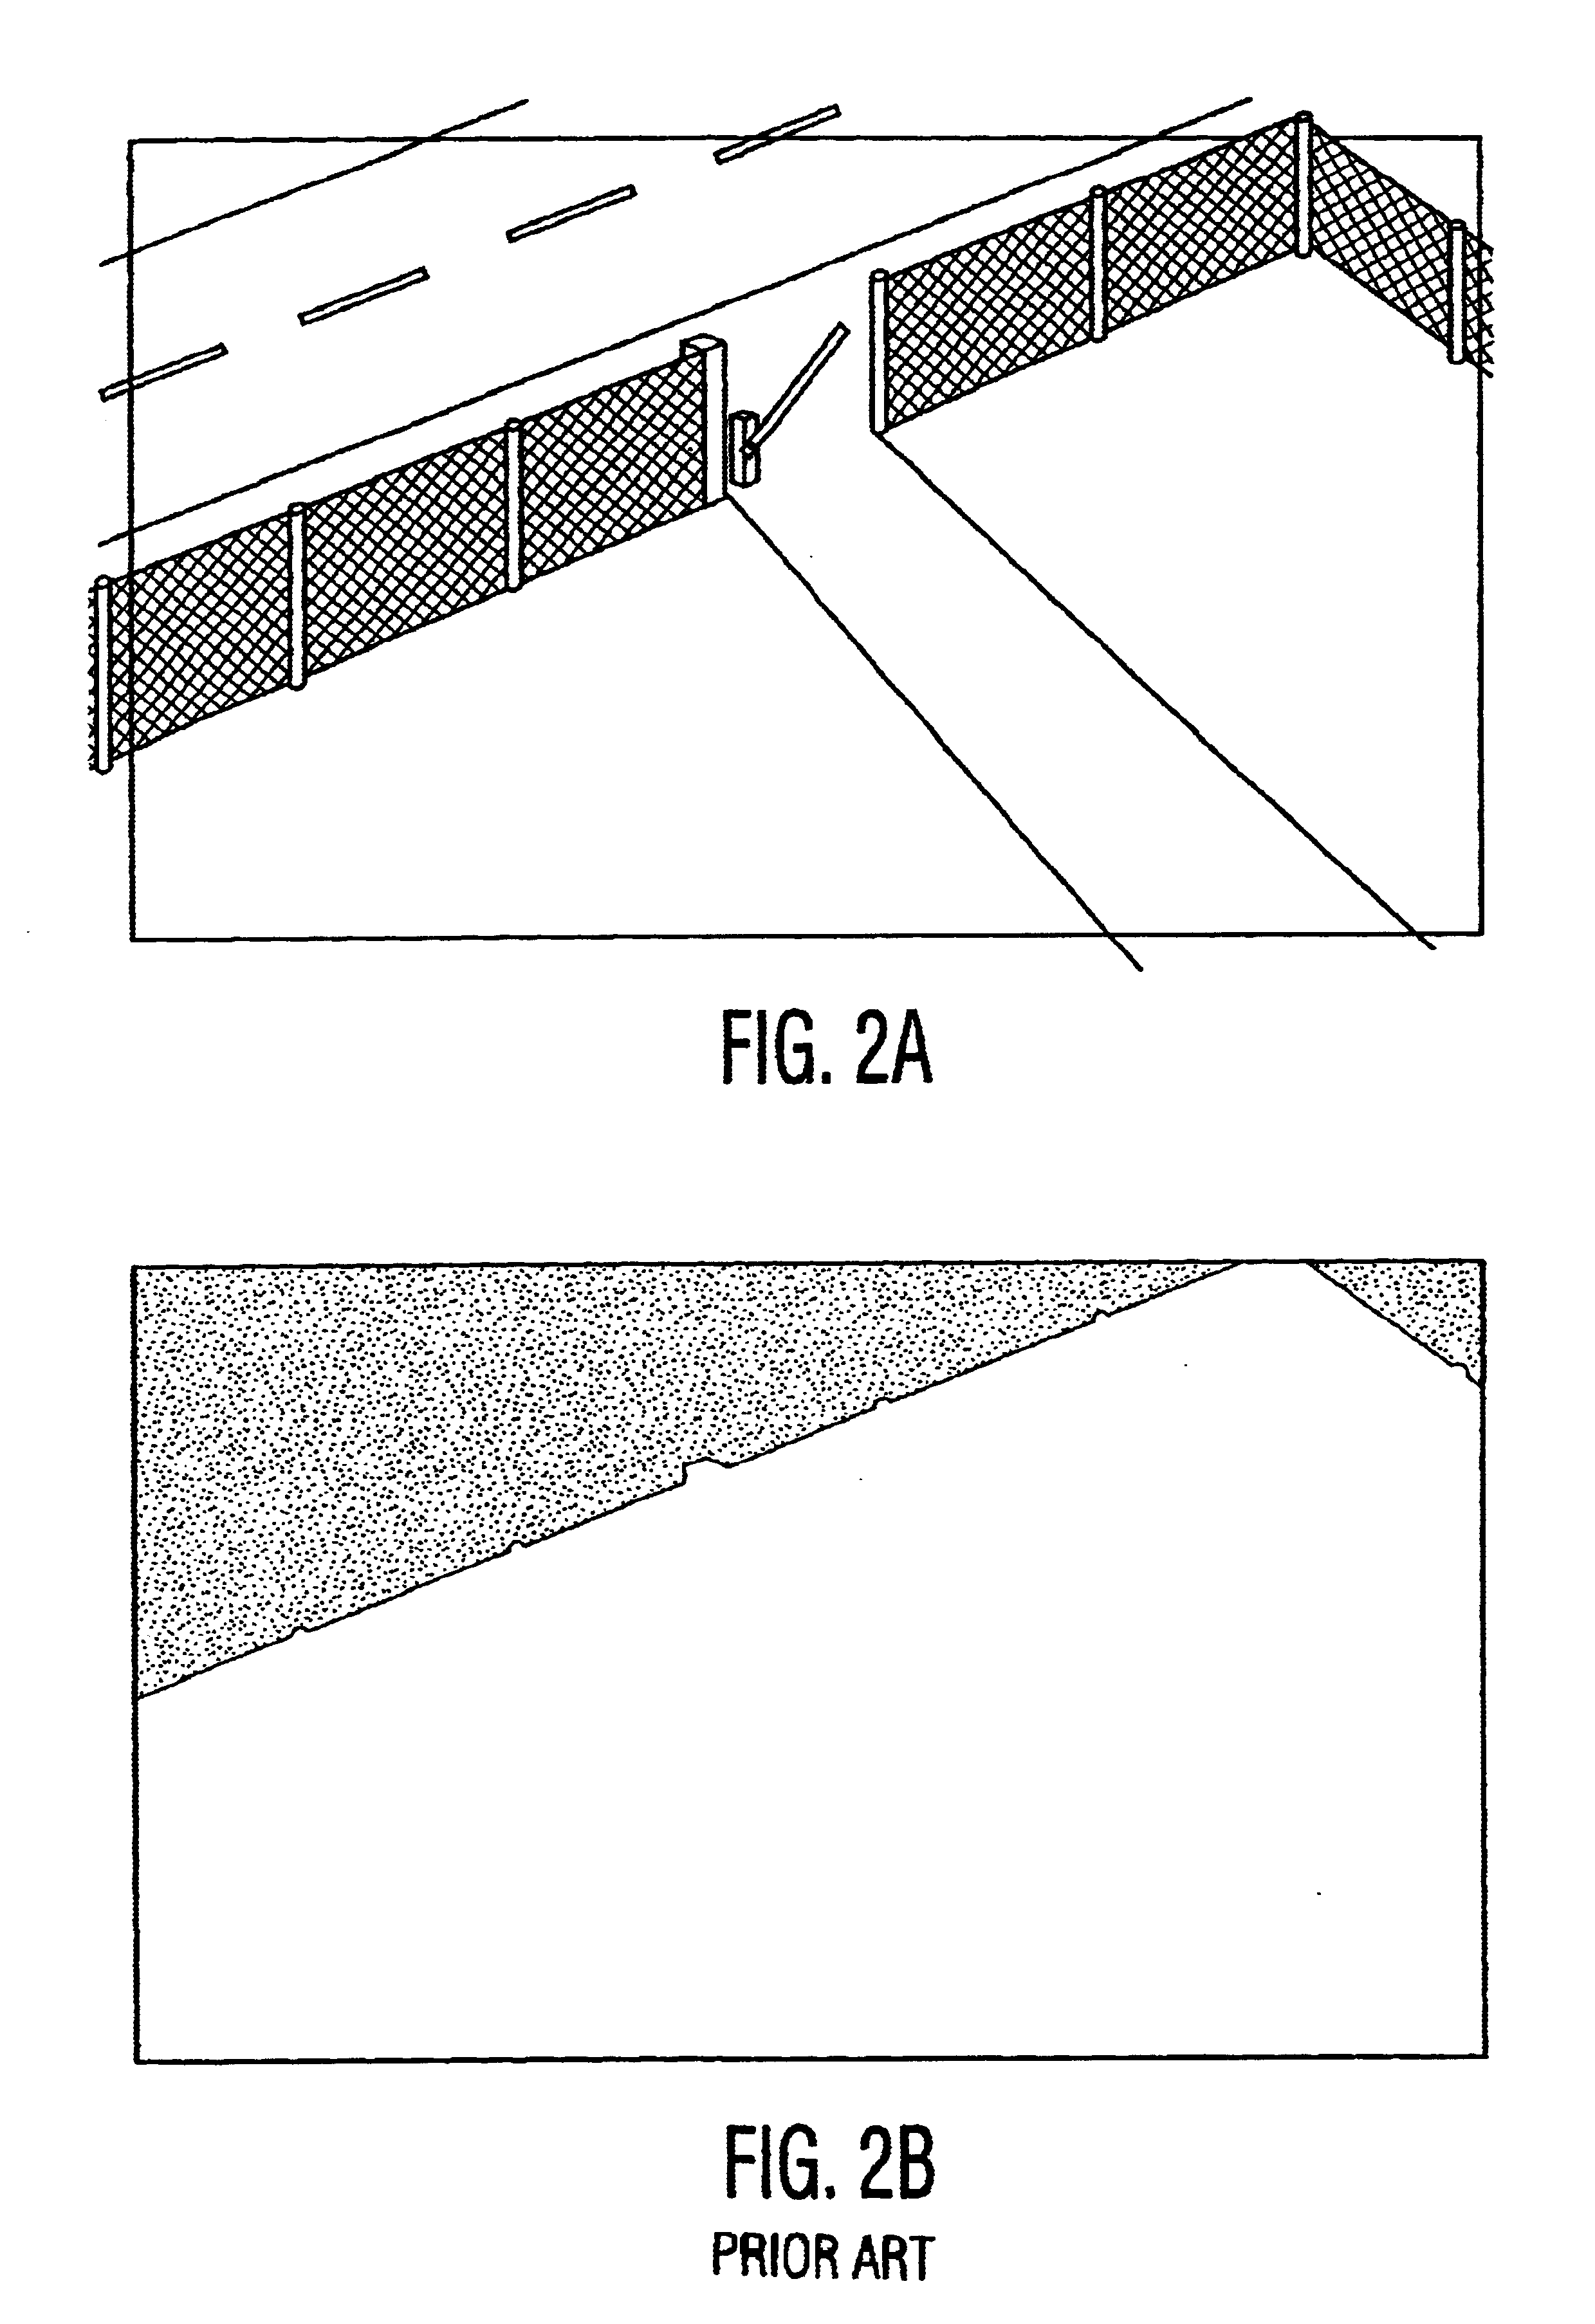 Security system with maskable motion detection and camera with an adjustable field of view